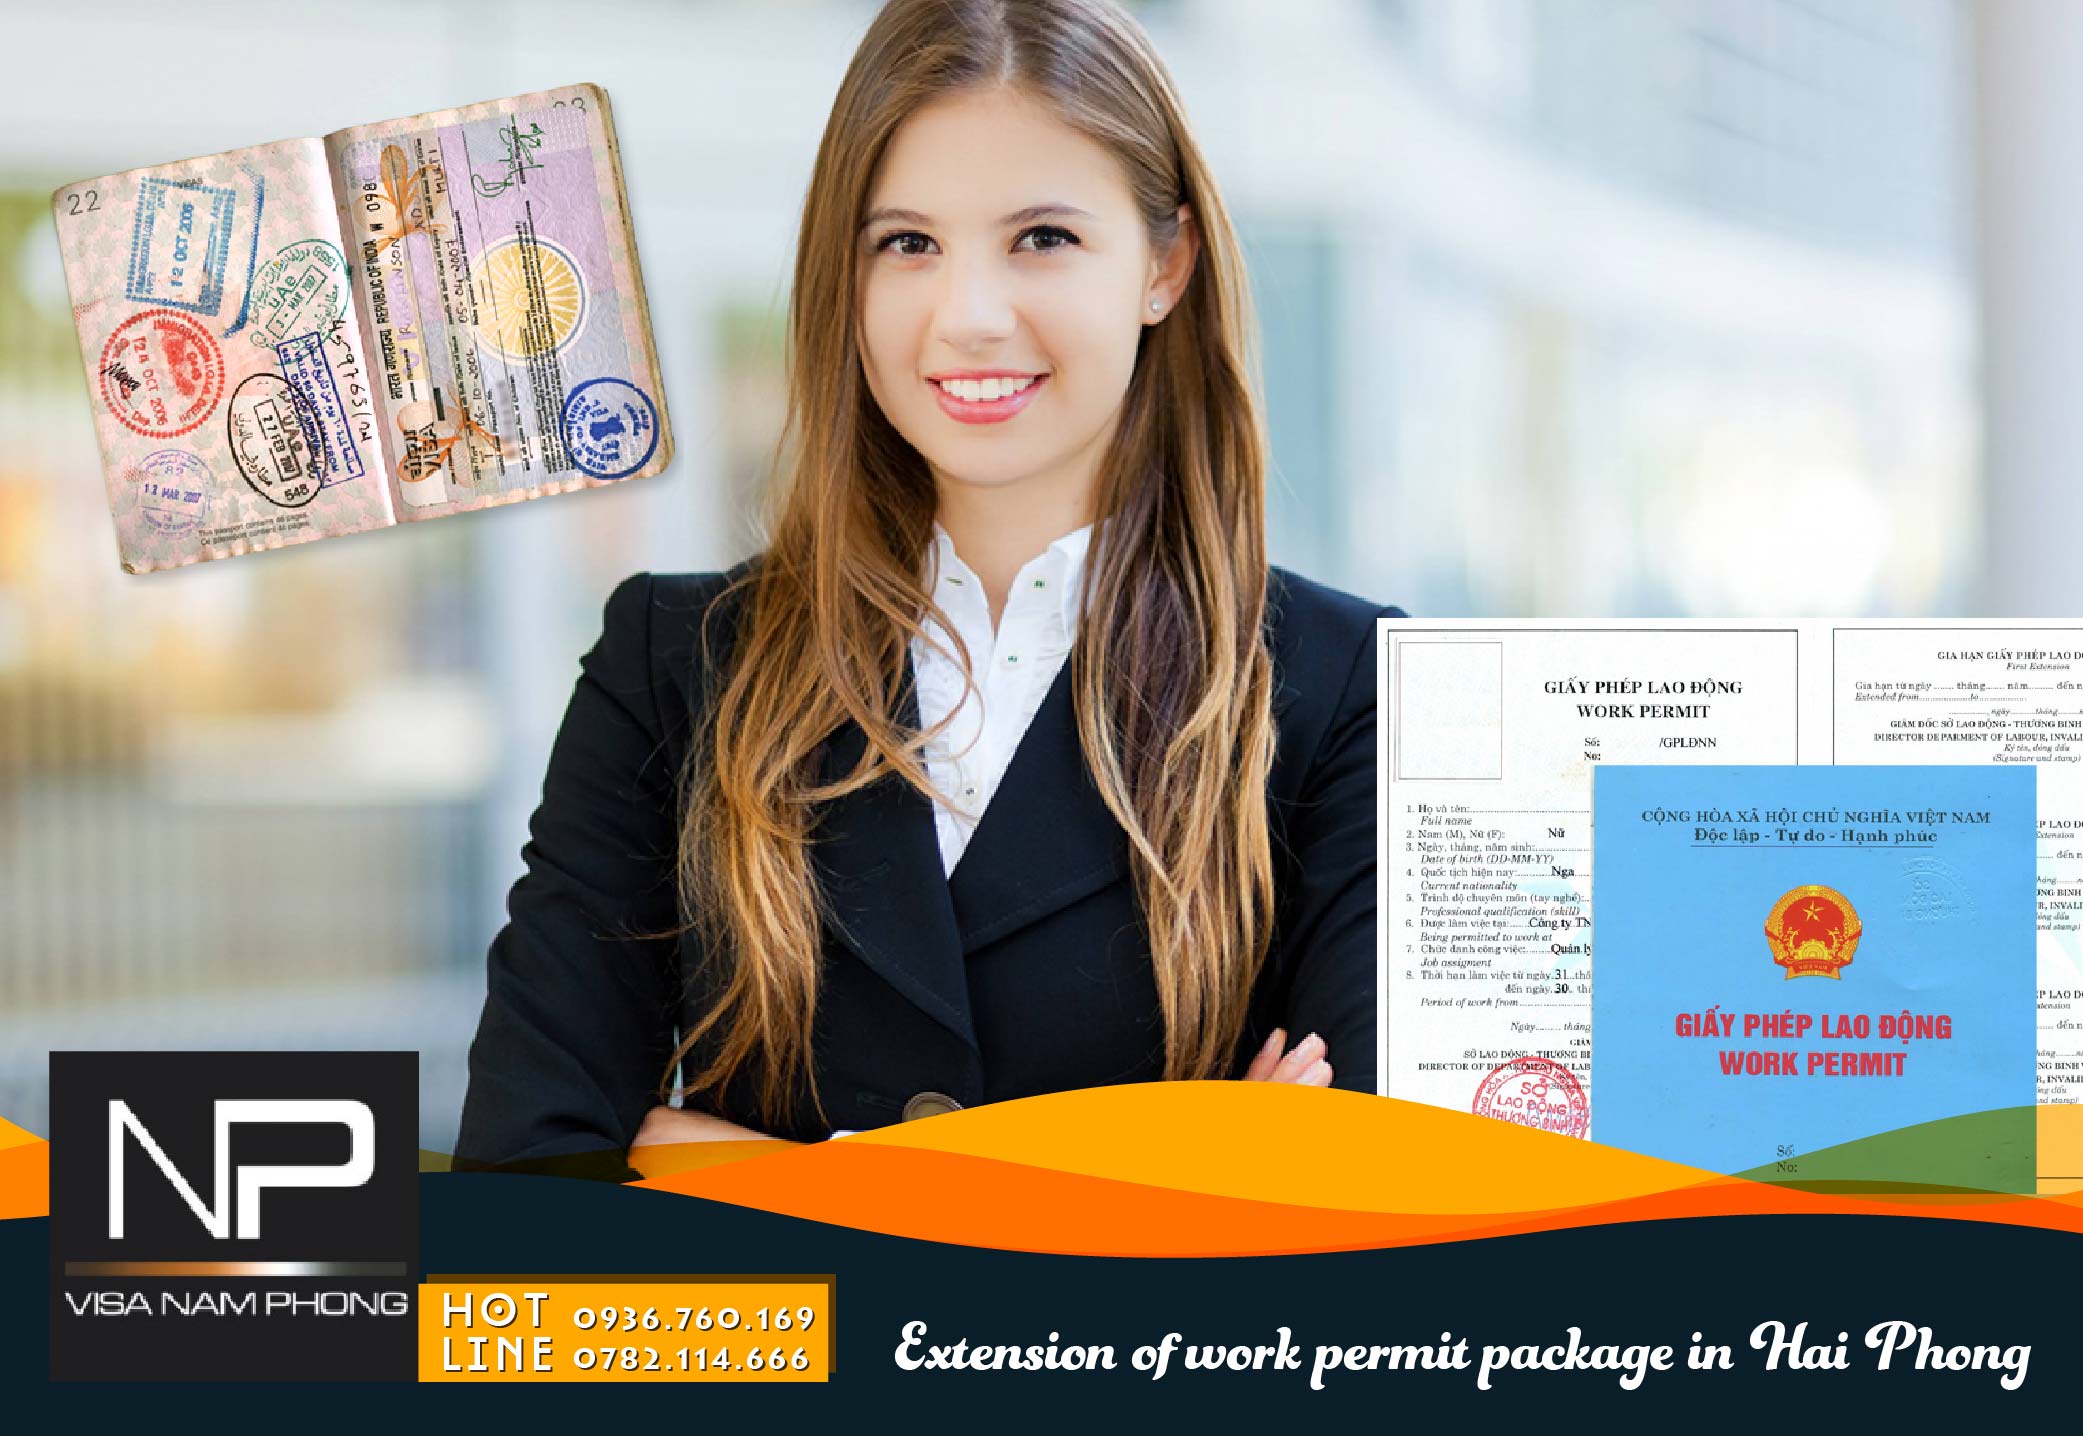 Extension of work permit package in Hai Phong